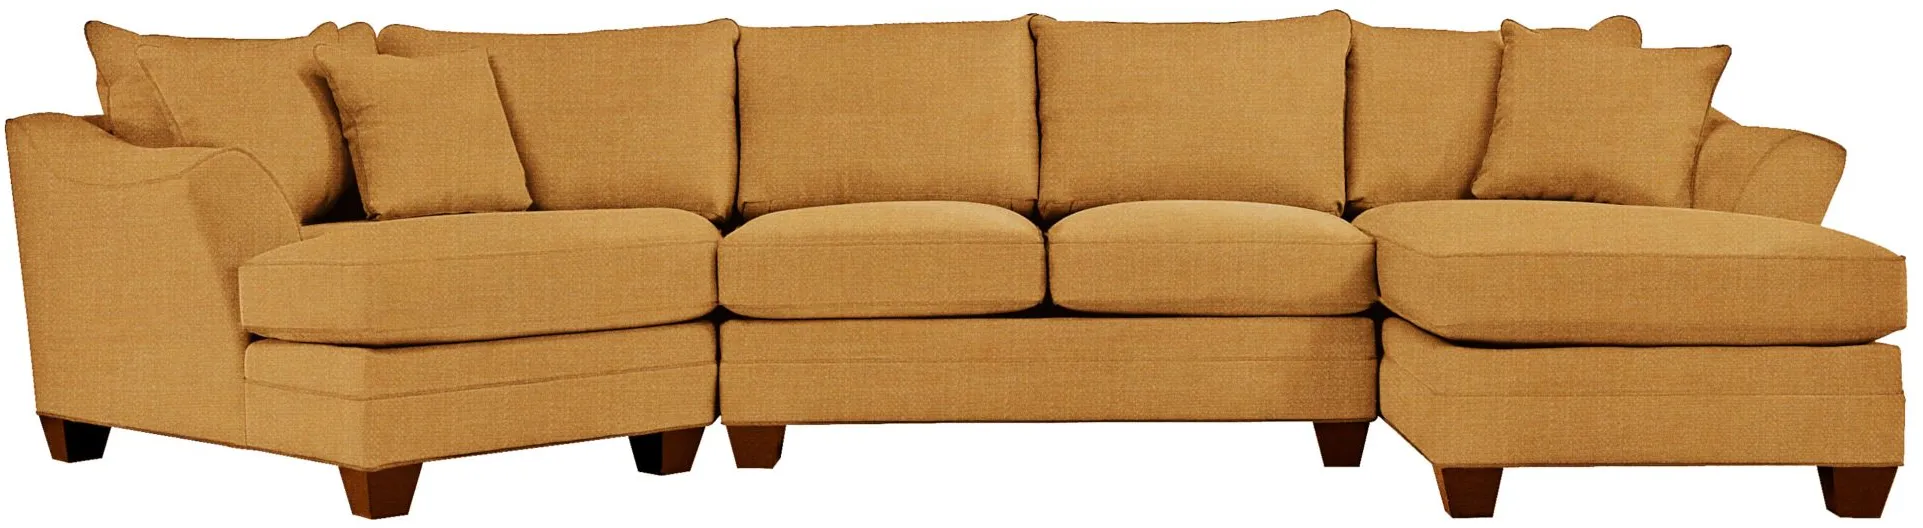 Foresthill 3-pc. Right Hand Facing Sectional Sofa in Elliot Sunflower by H.M. Richards